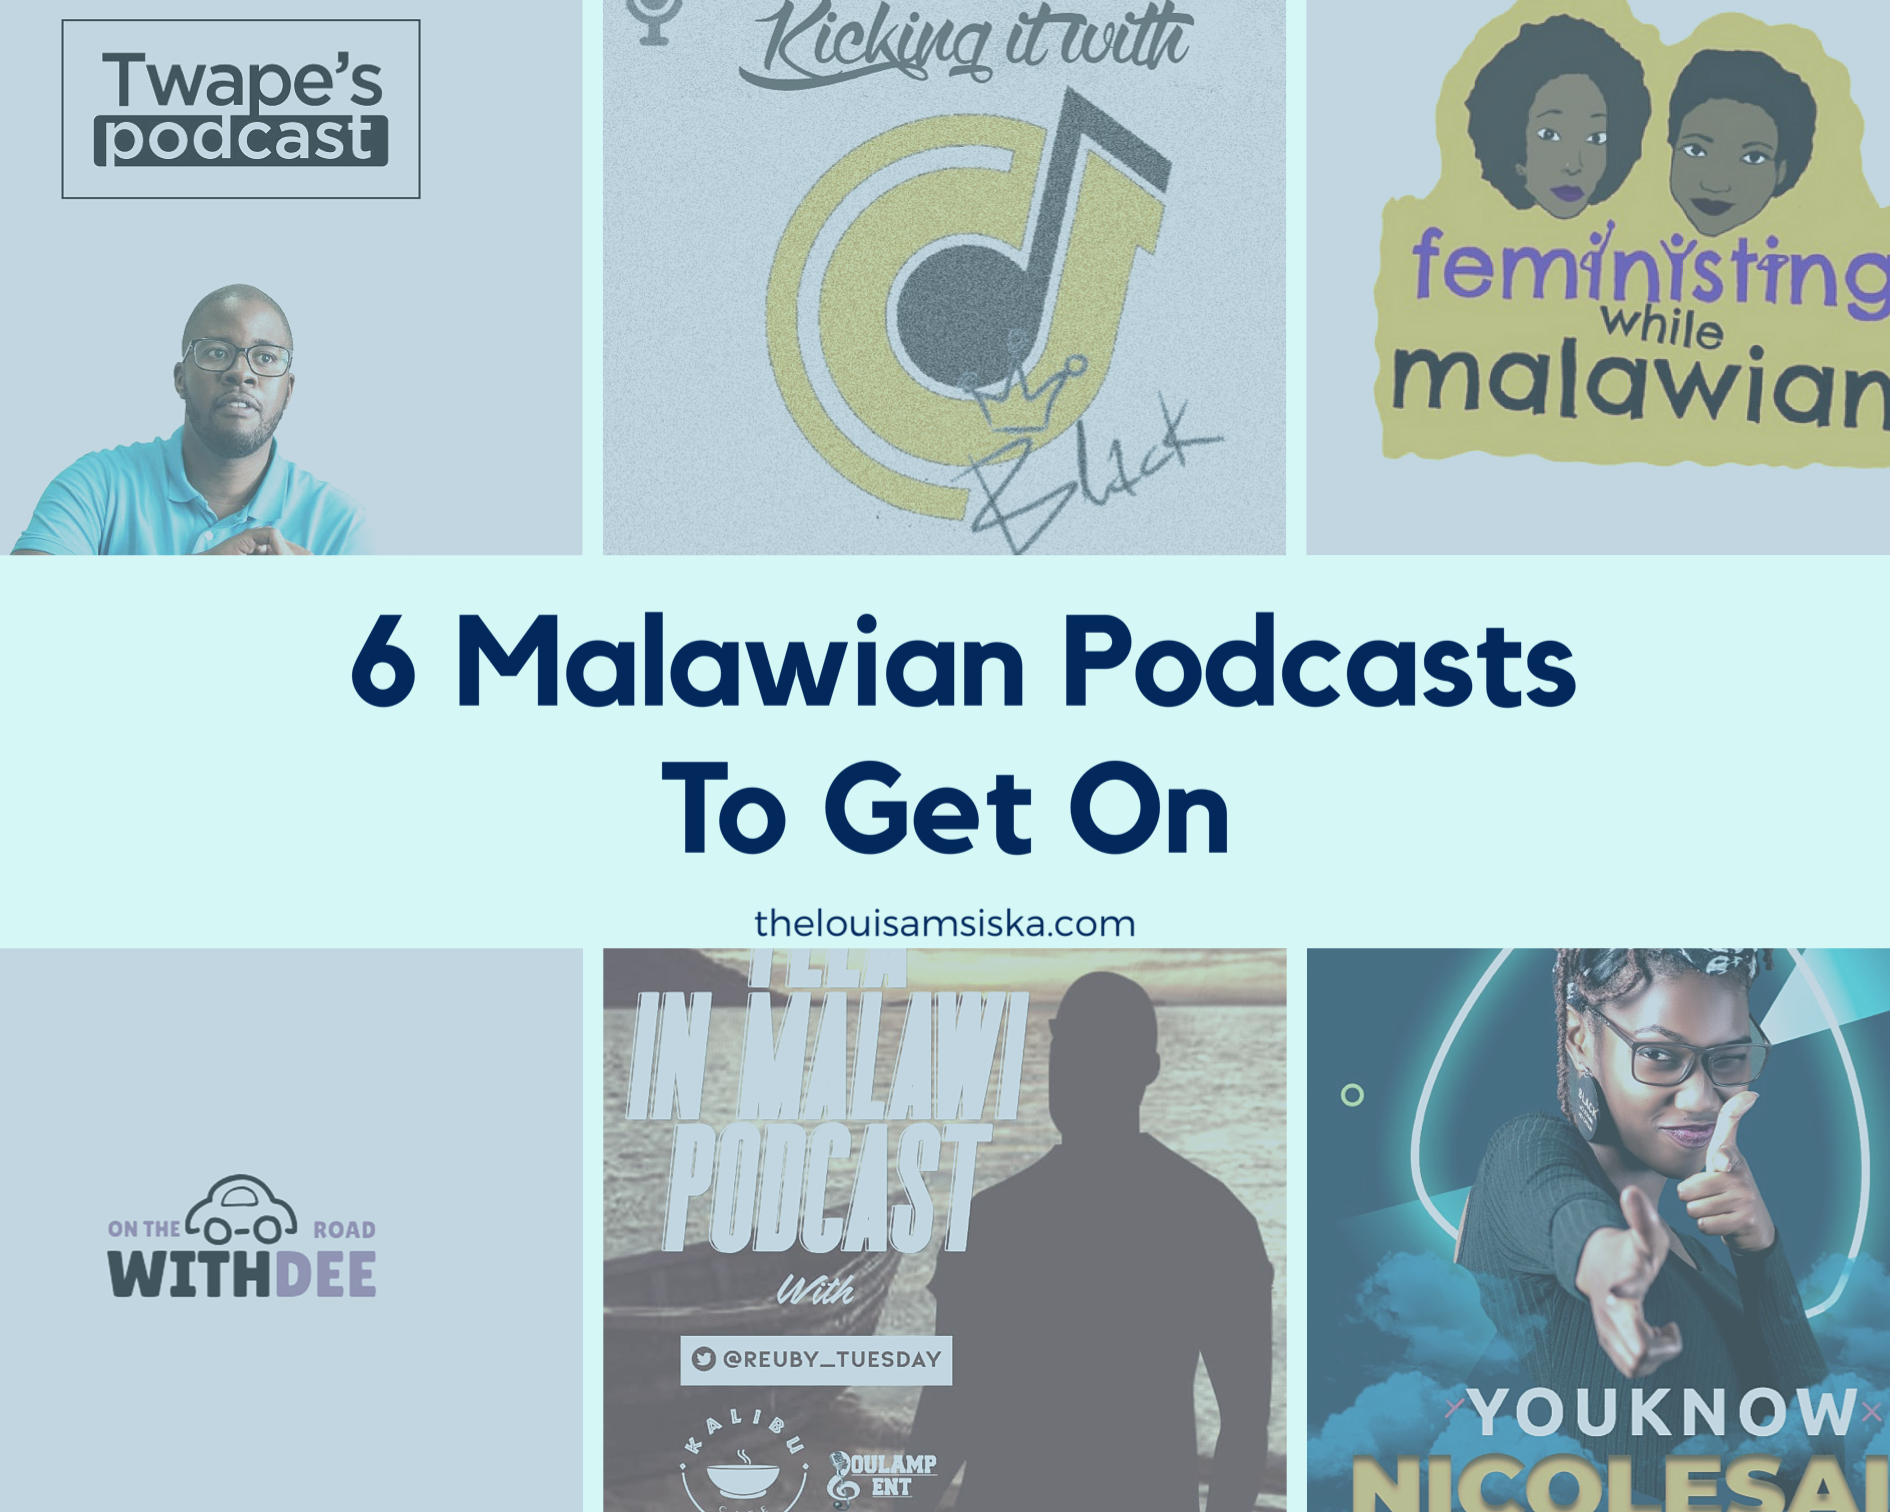 6 Malawian podcasts